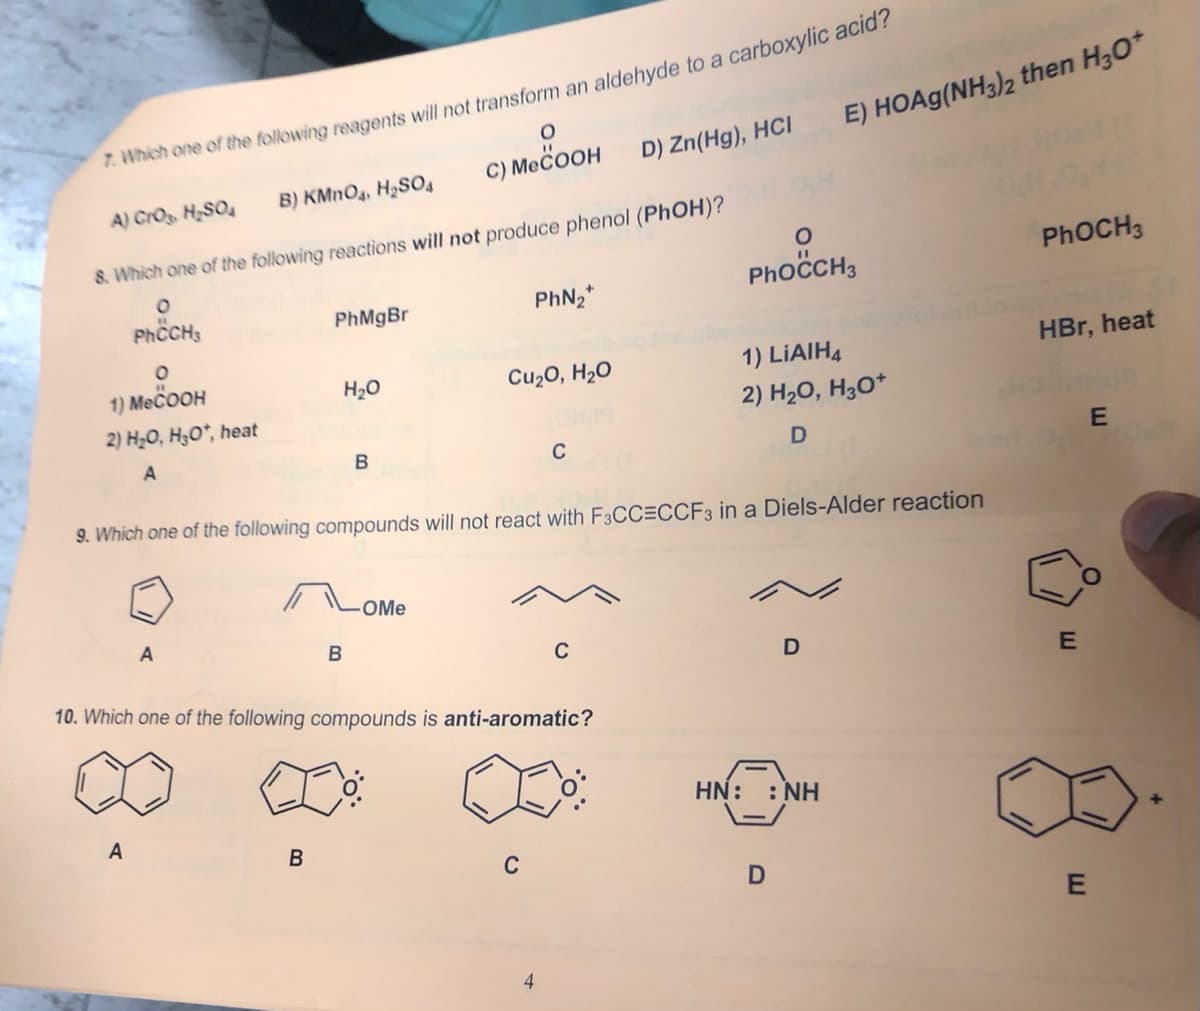 7. Which one of the following reagents will not transform an aldehyde to a carboxylic acia?
C) MECOOH
E) HOA9(NH3)2 then H30*
D) Zn(Hg), HCI
A) CrOs, H,SO4
B) KMNO4, H2SO4
8. Which one of the following reactions will not produce phenol (PhOH)?
PhoCH3
PHOCH3
PhCH;
PhMgBr
PhN2*
1) MECOOH
H20
Cu2O, H2O
1) LIAIH4
HBr, heat
2) H20, H;O*, heat
2) H2O, H3O*
C
9. Which one of the following compounds will not react with F3CC=CCF3 in a Diels-Alder reaction
-OMe
B
C
10. Which one of the following compounds is anti-aromatic?
HN: : NH
A
B
C
4
